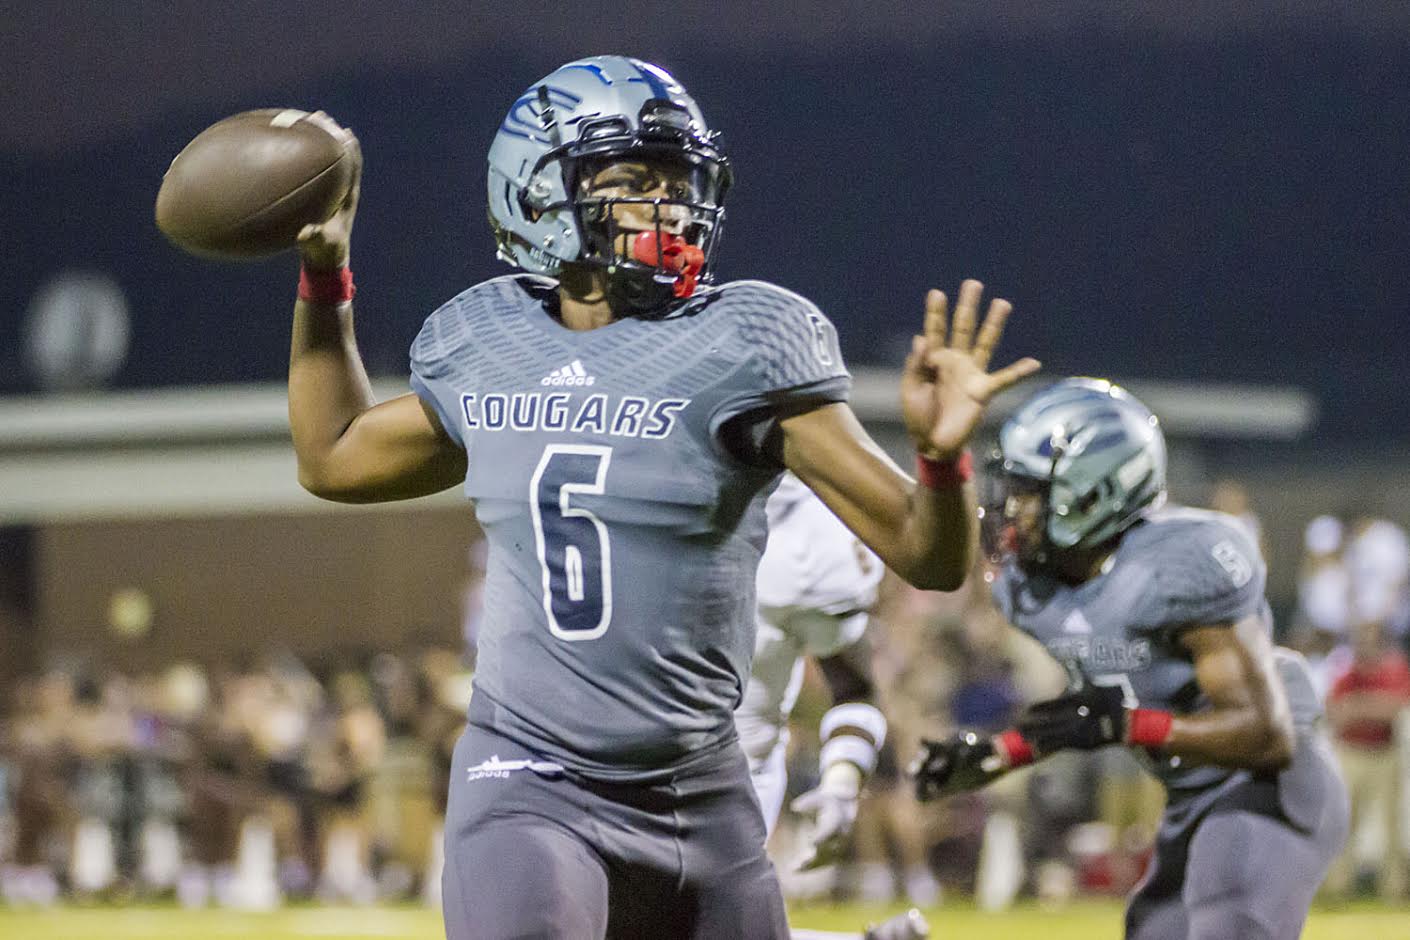 Clay-Chalkville Cougars dominate in win against James Clemens